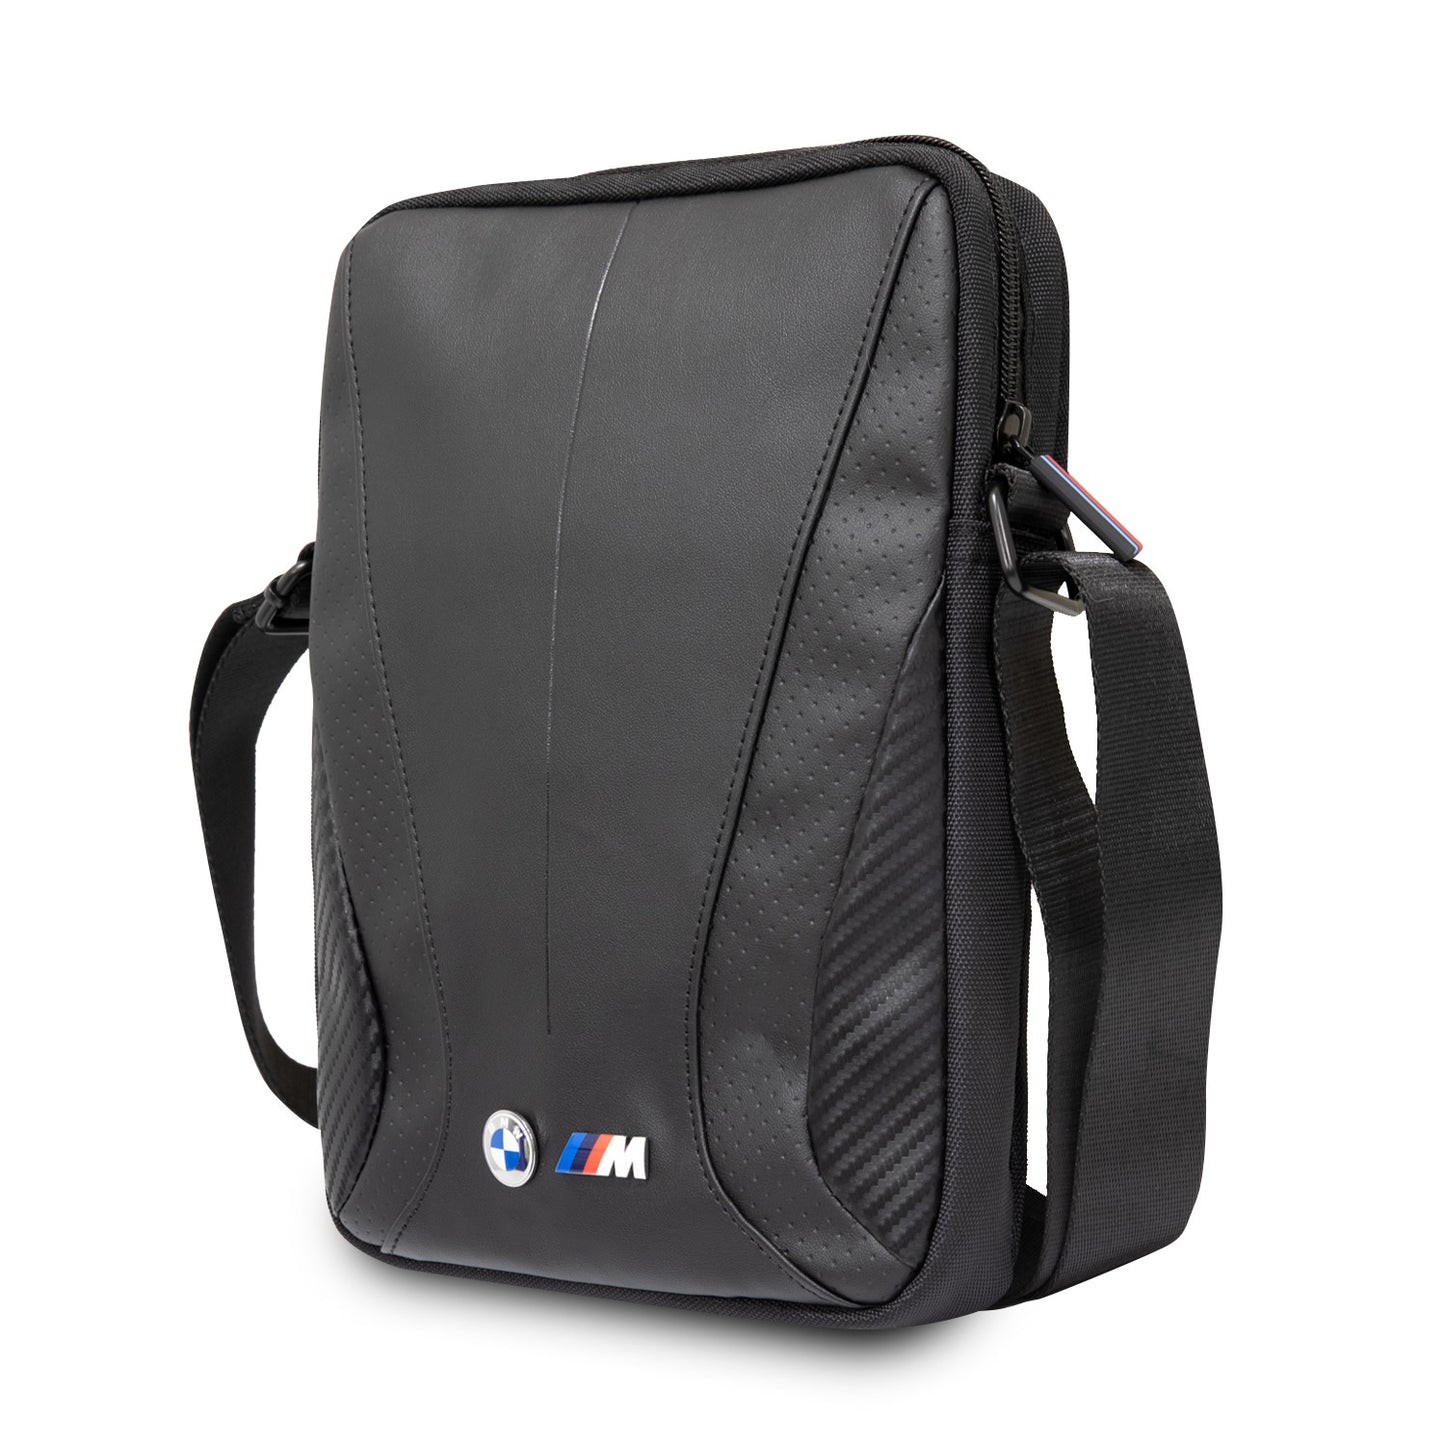 BMW 10 Inch Tablet Bag - Perforated - Zwart